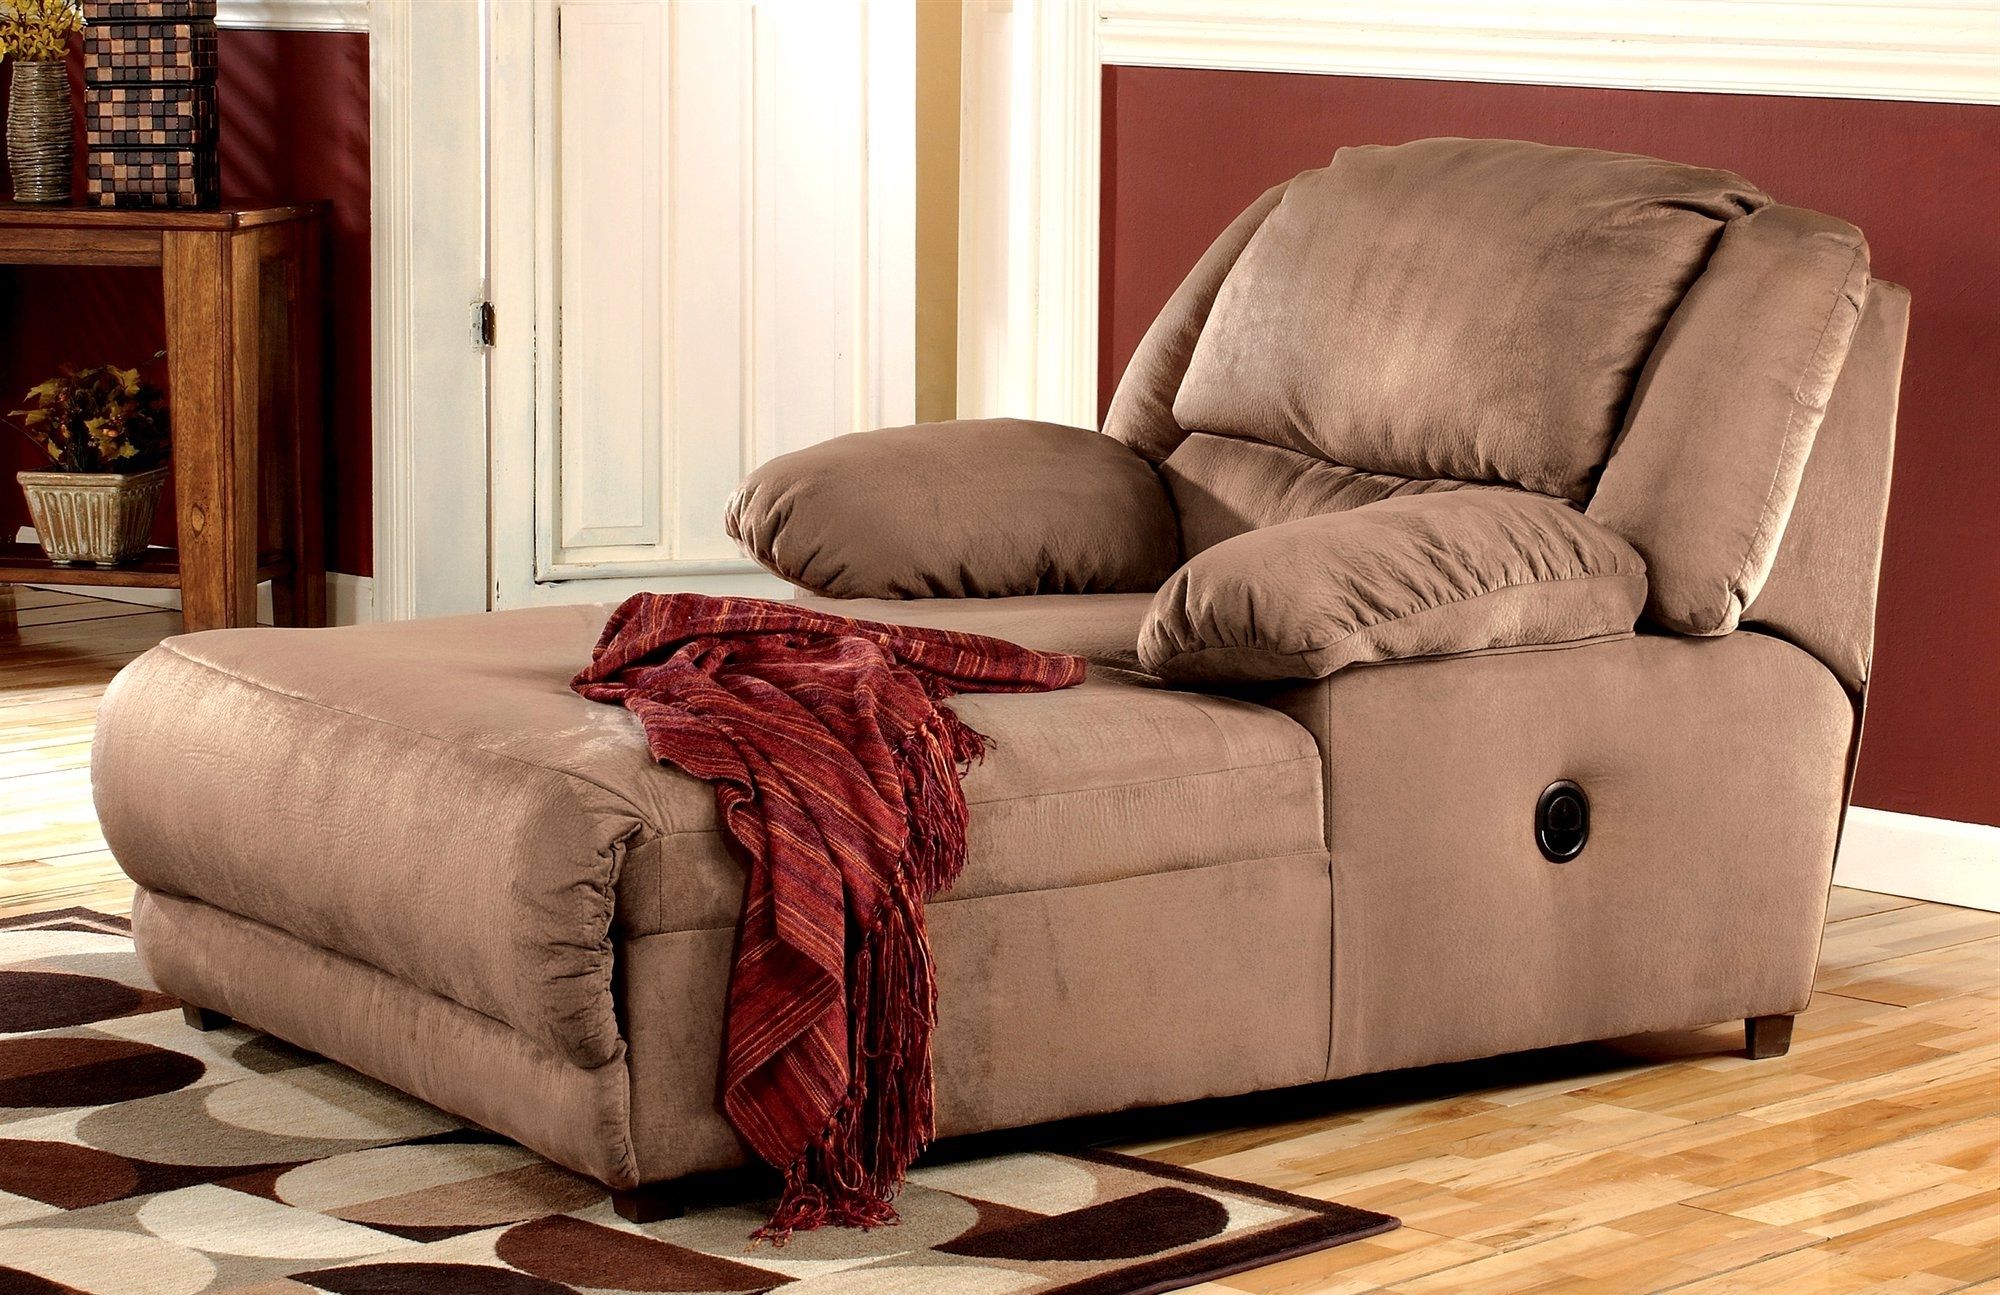 chair sofa lounger bed